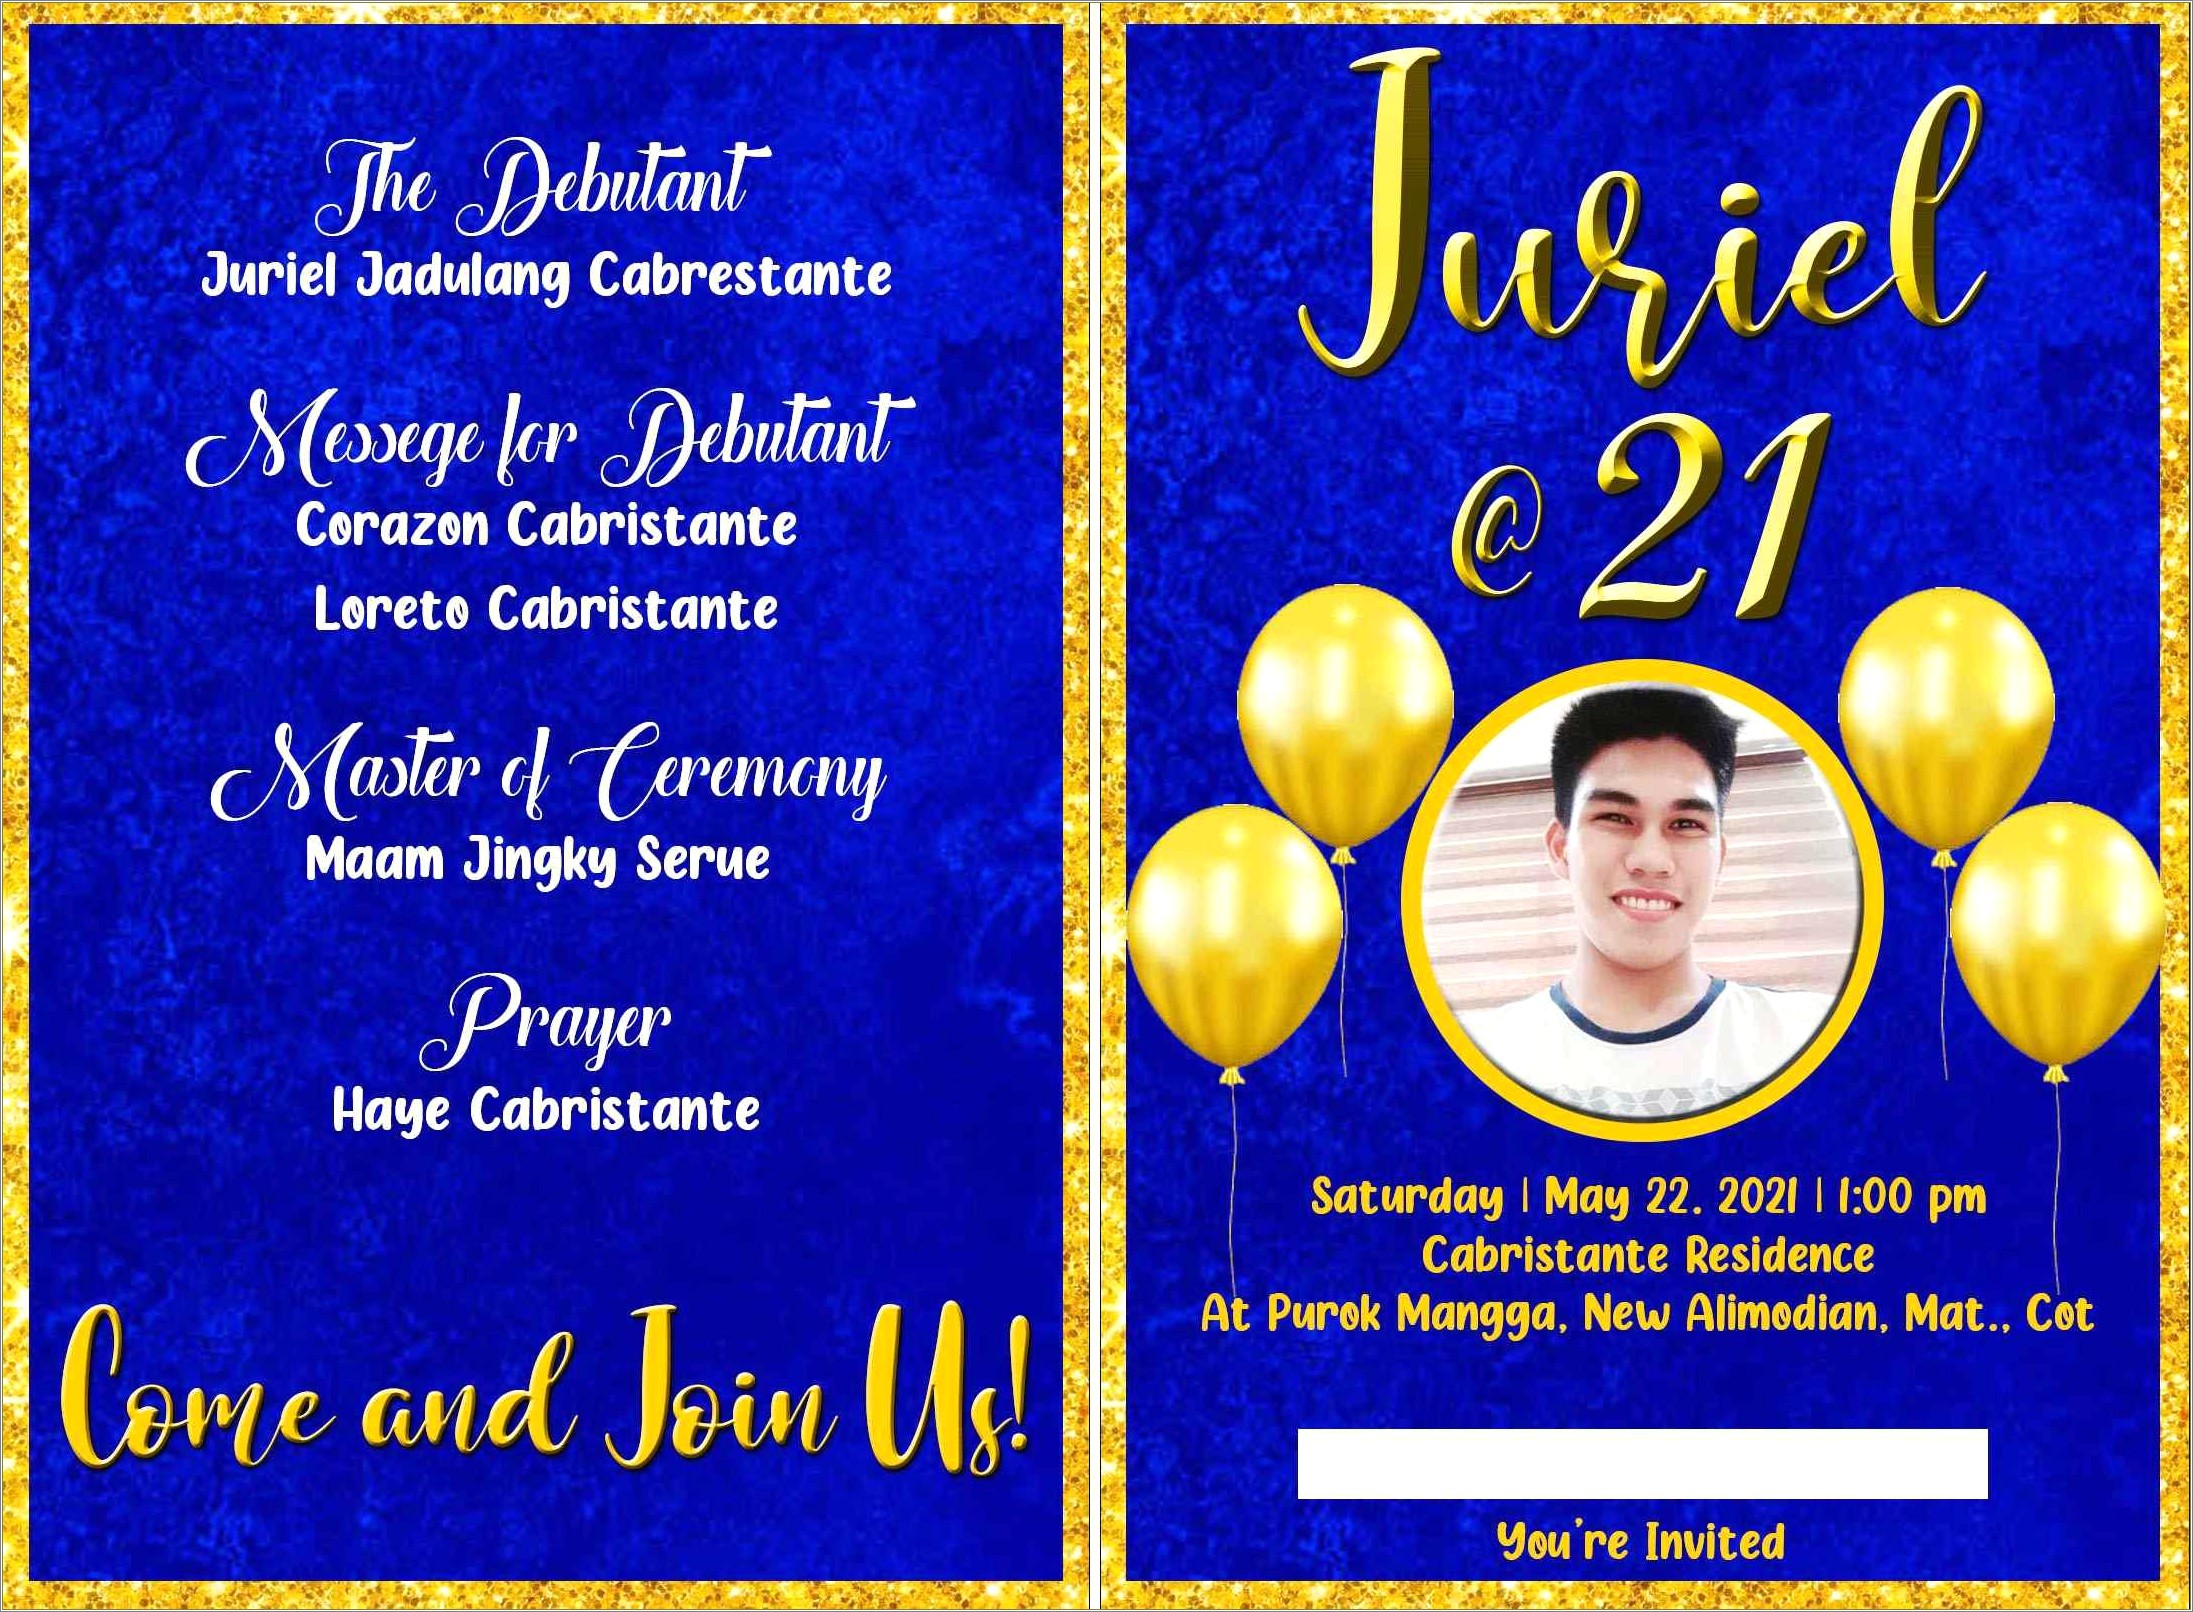 Free Templates For 21st Birthday Party Invitations